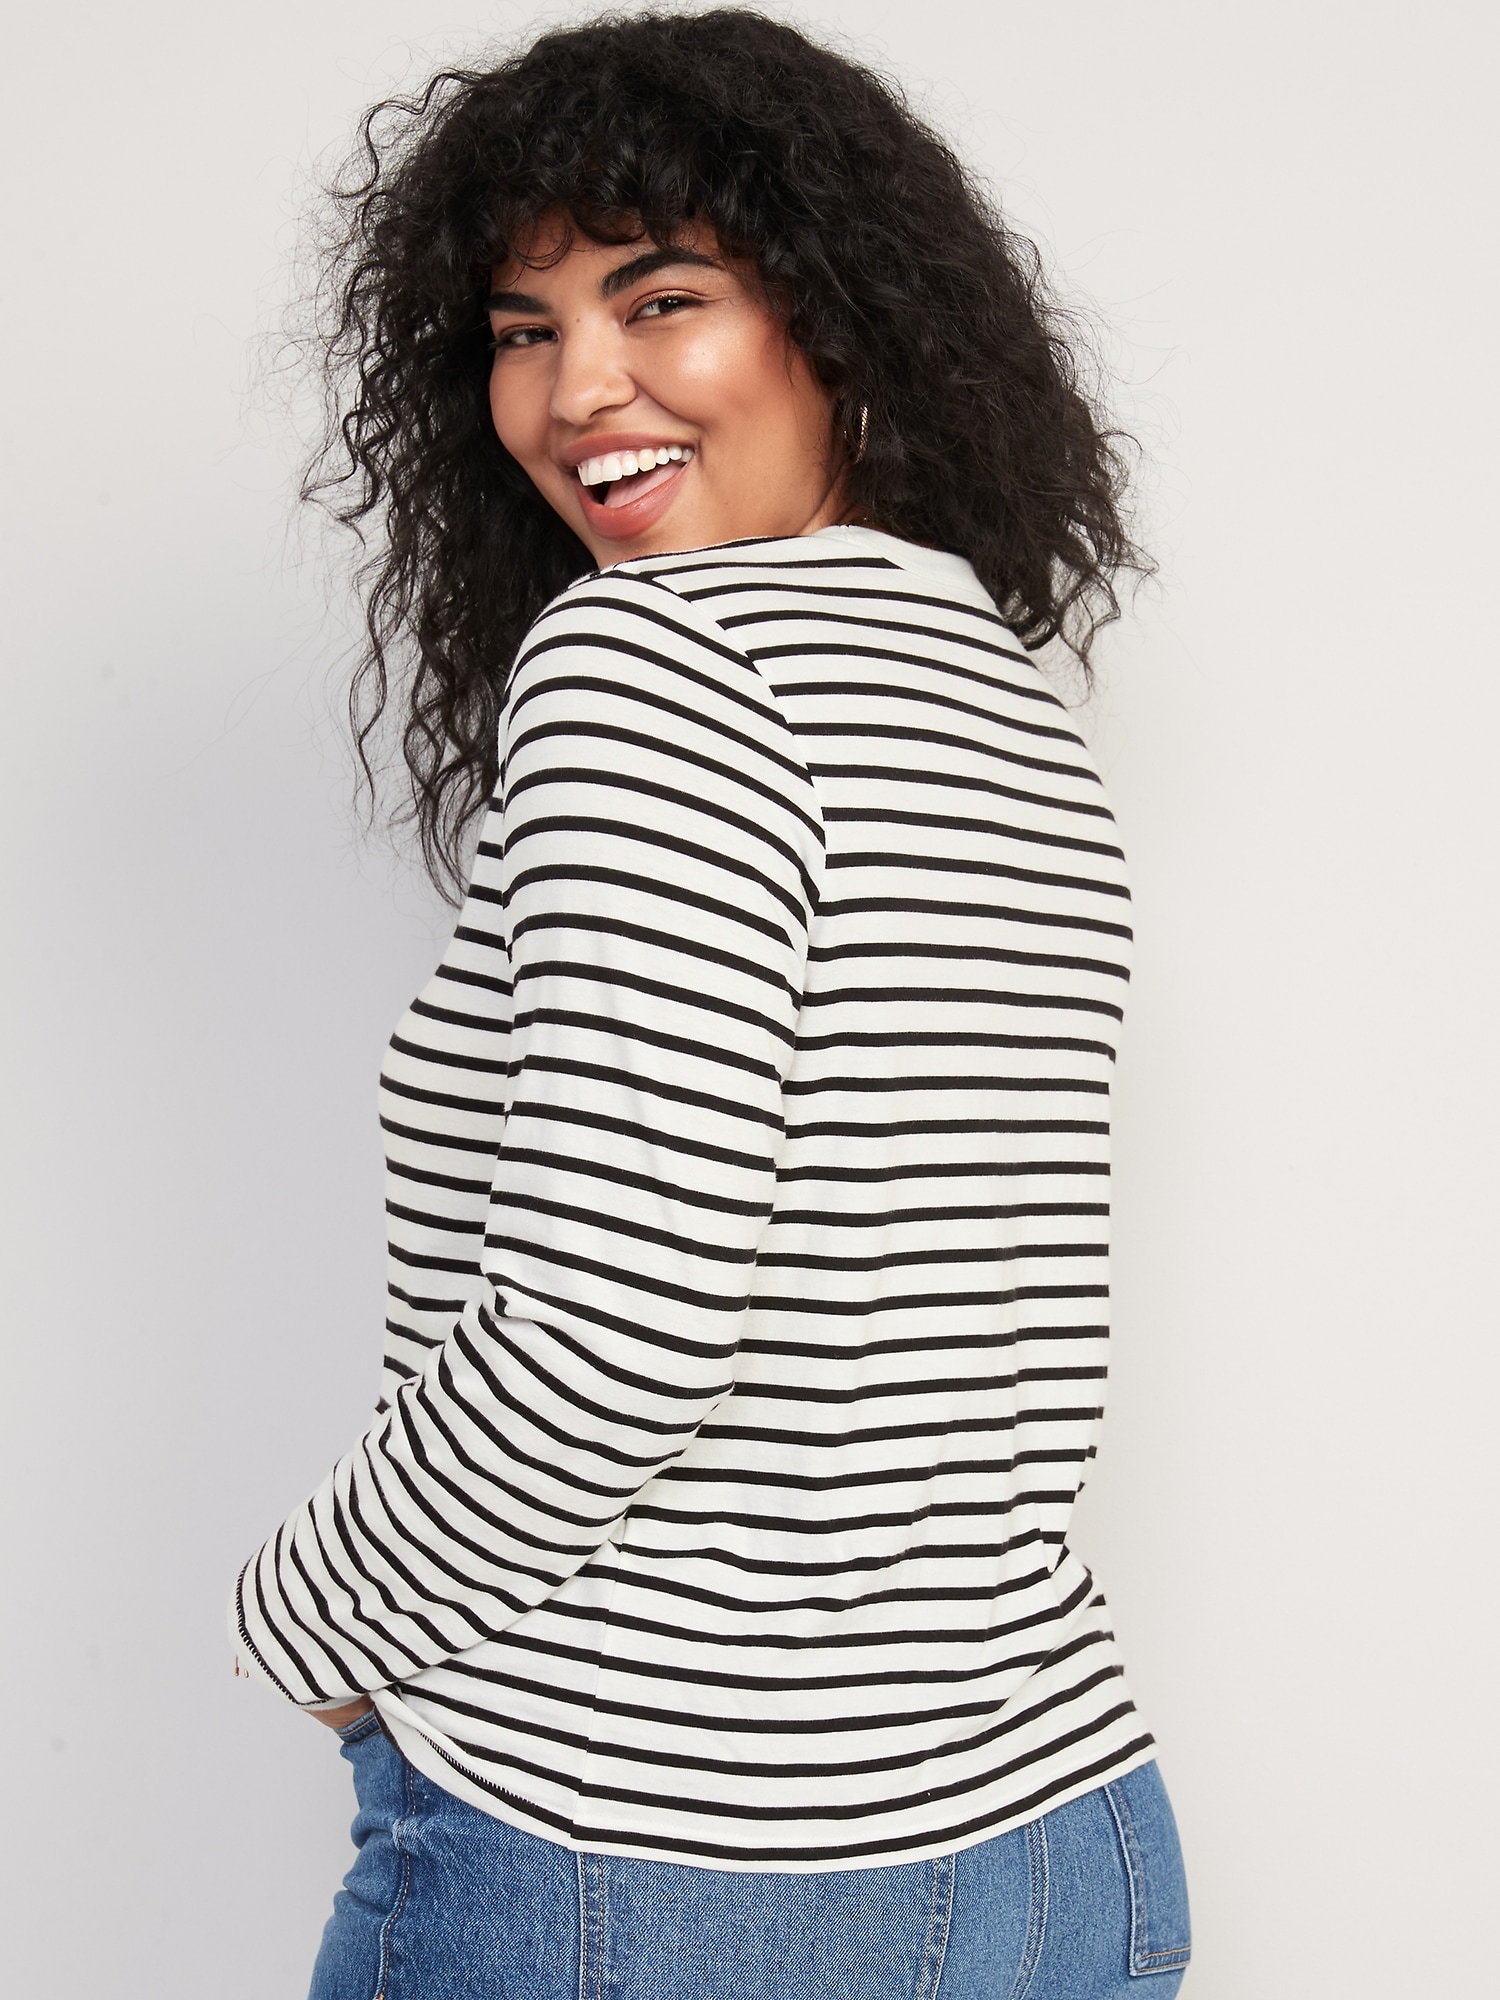 Long-Sleeve EveryWear Striped T-Shirt for Women | Old Navy